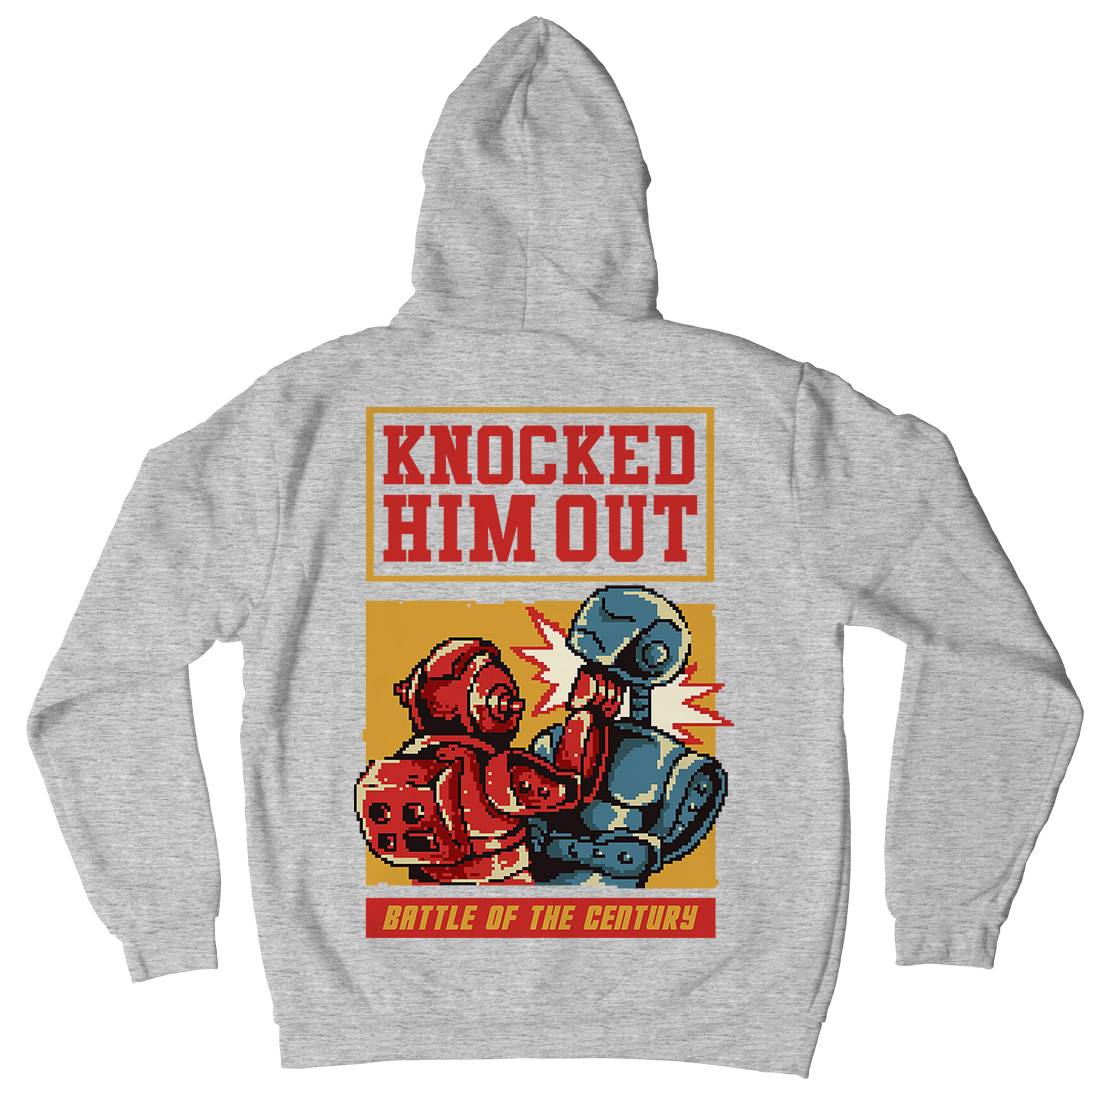 Knocked Him Out Kids Crew Neck Hoodie Space B923